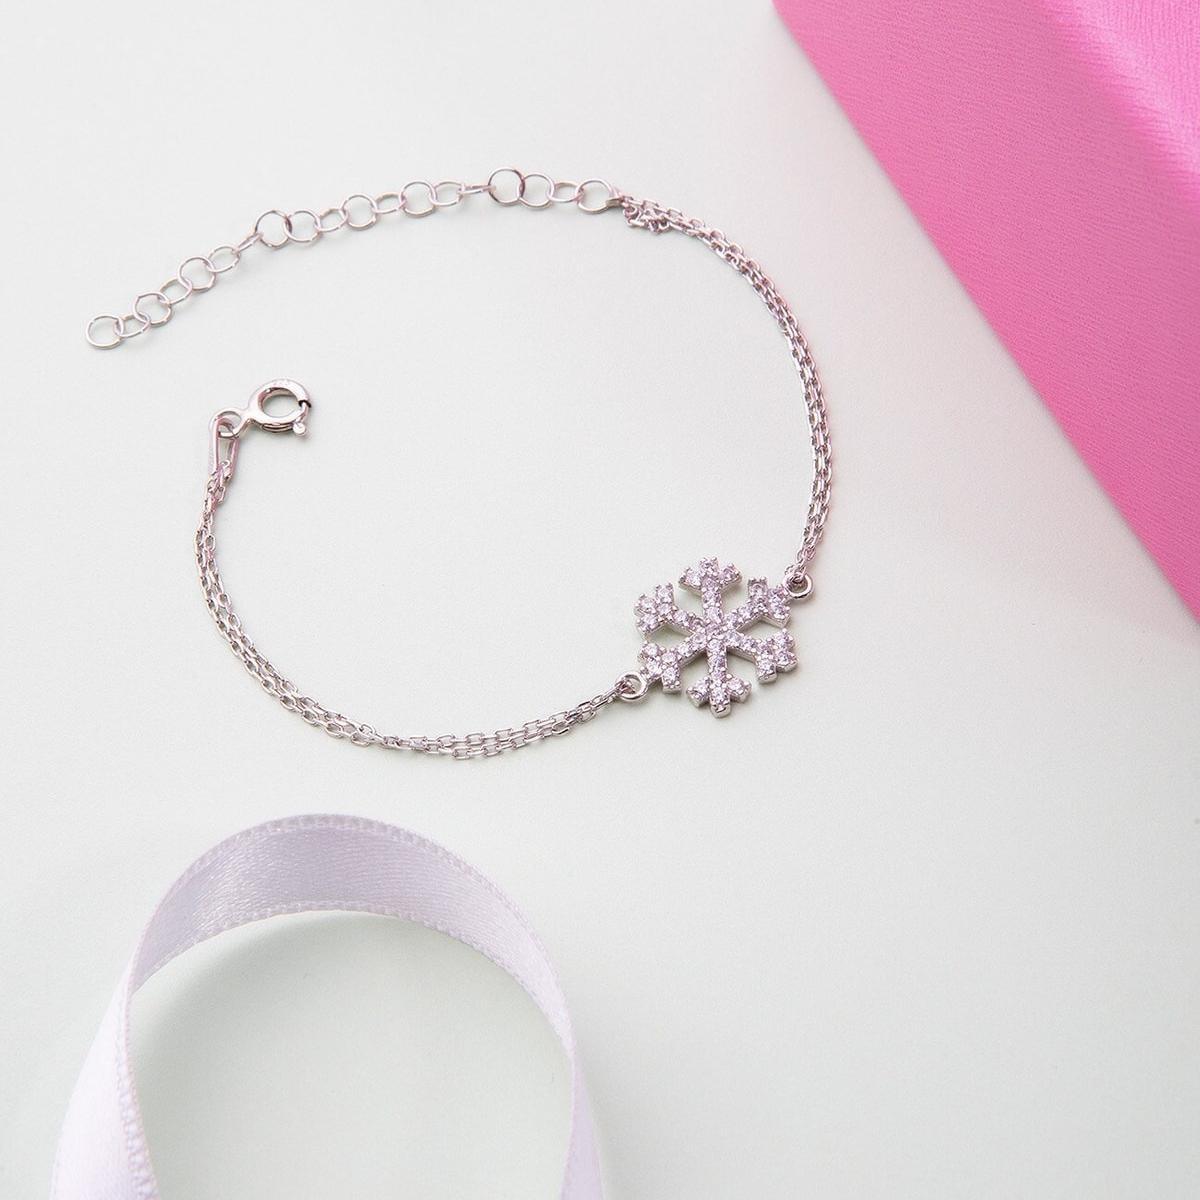 Snowflakes Bracelet • Bridesmaid Gift For Wedding • Gift For Wife - Trending Silver Gifts